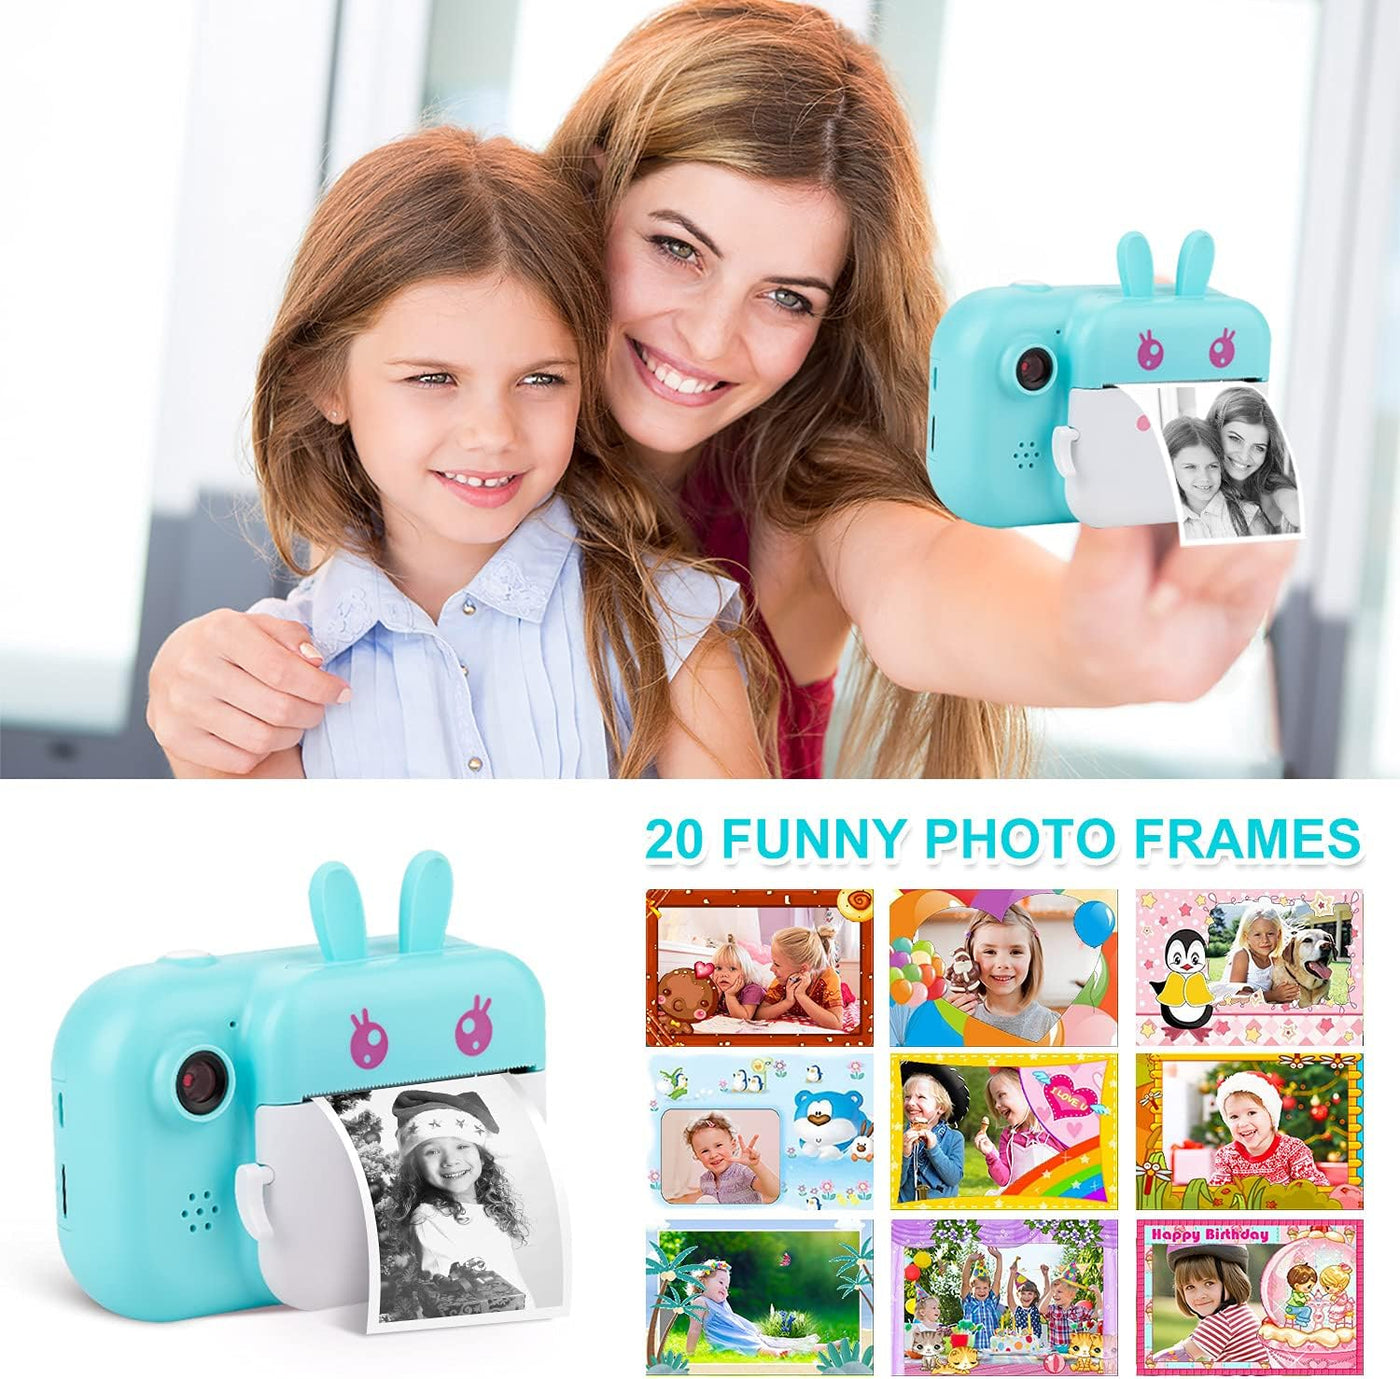  ESOXOFFORE Instant Print Camera for Kids, Christmas